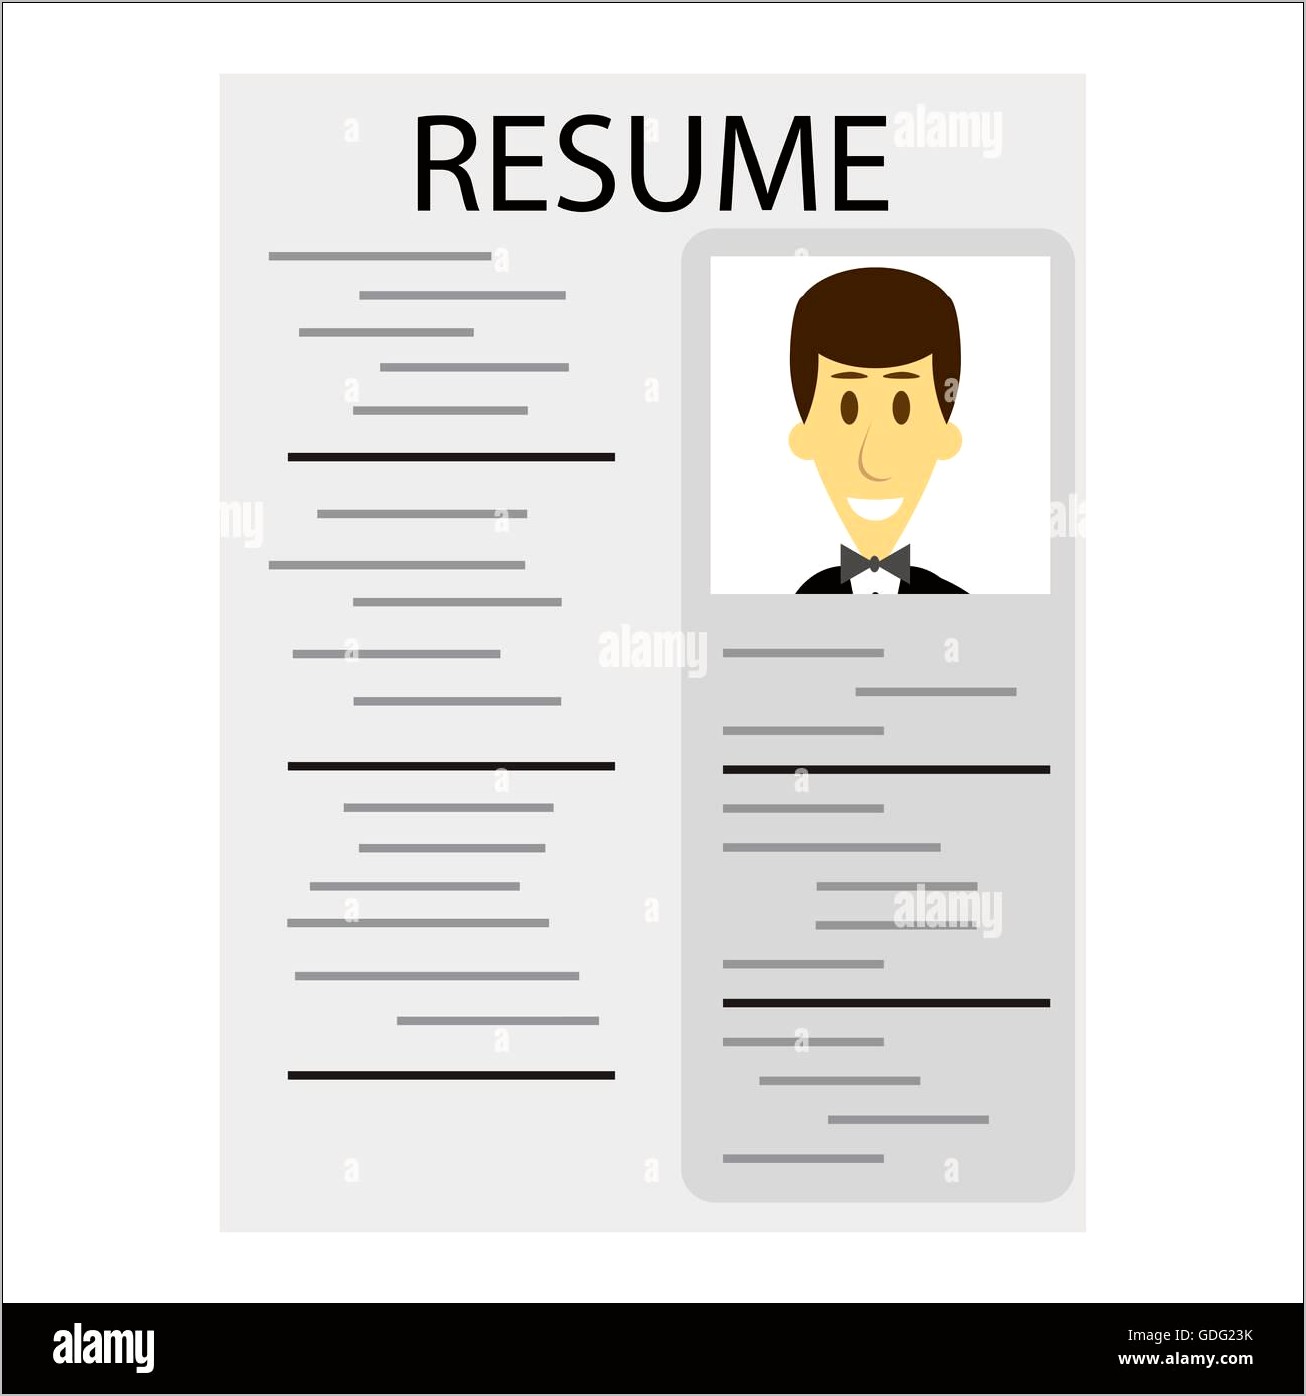 Pictures Of A Job Resume